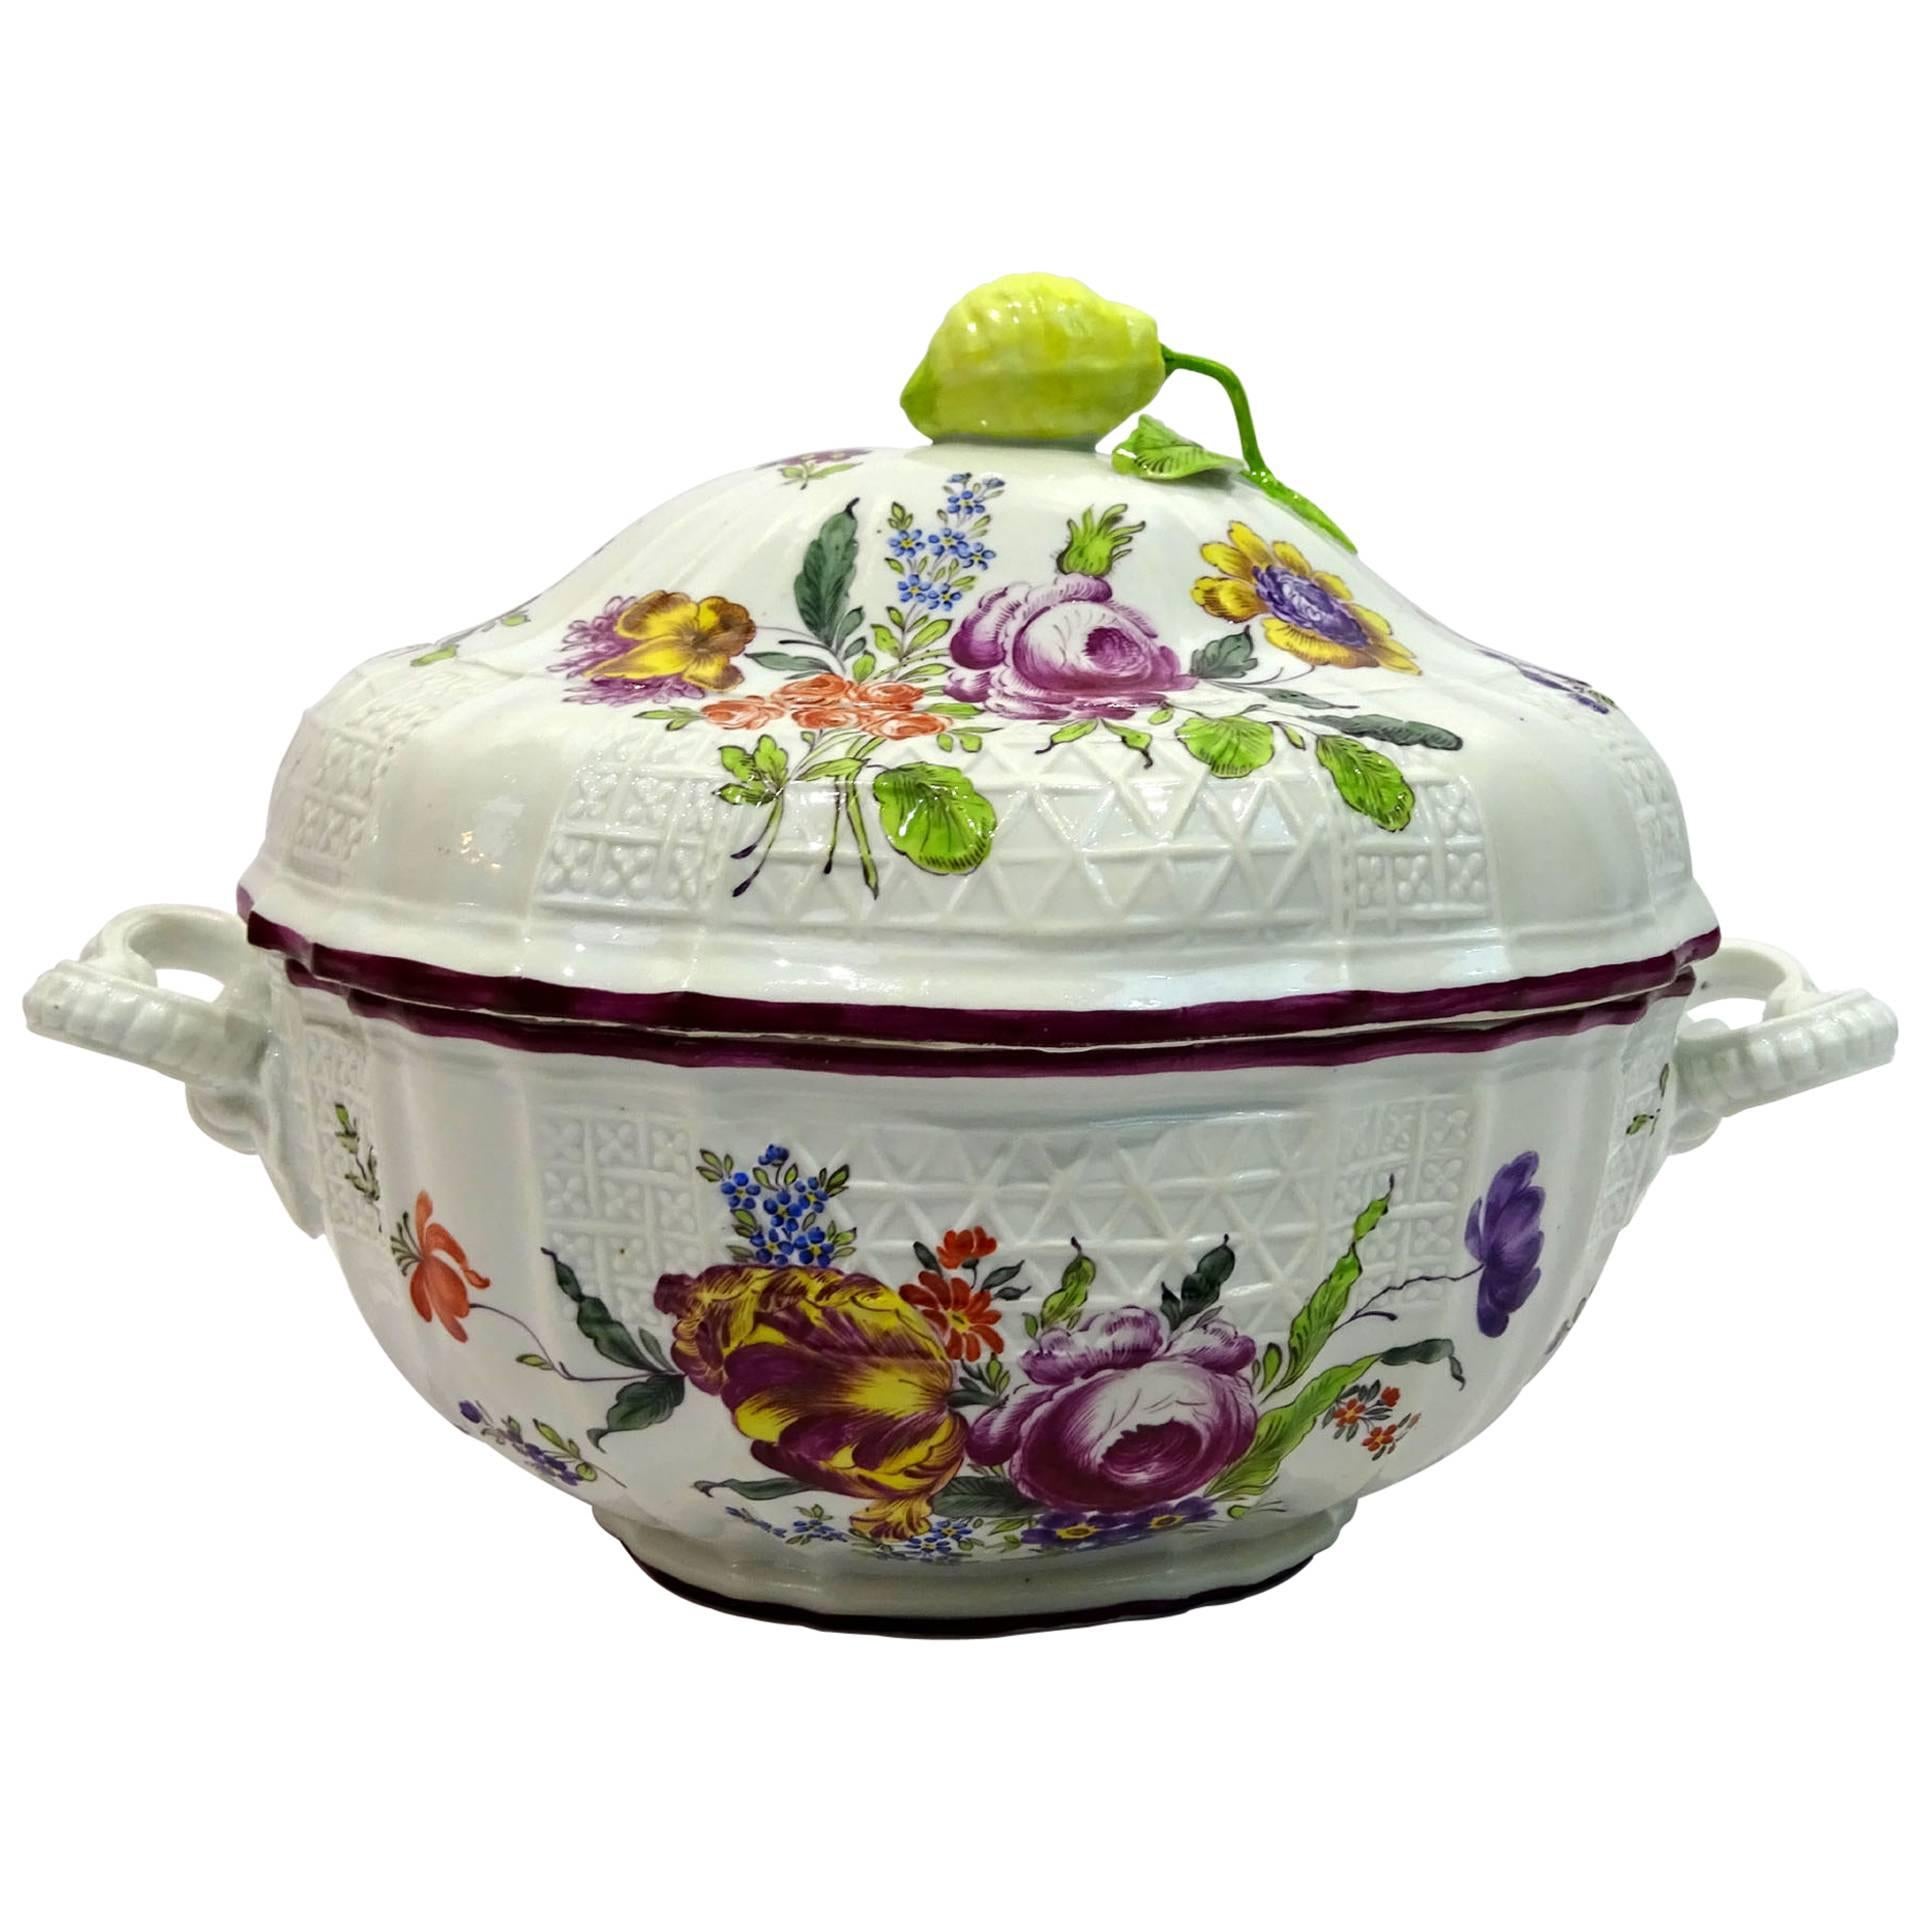 Early 20th Century French Meissen-Style Porcelain Tureen